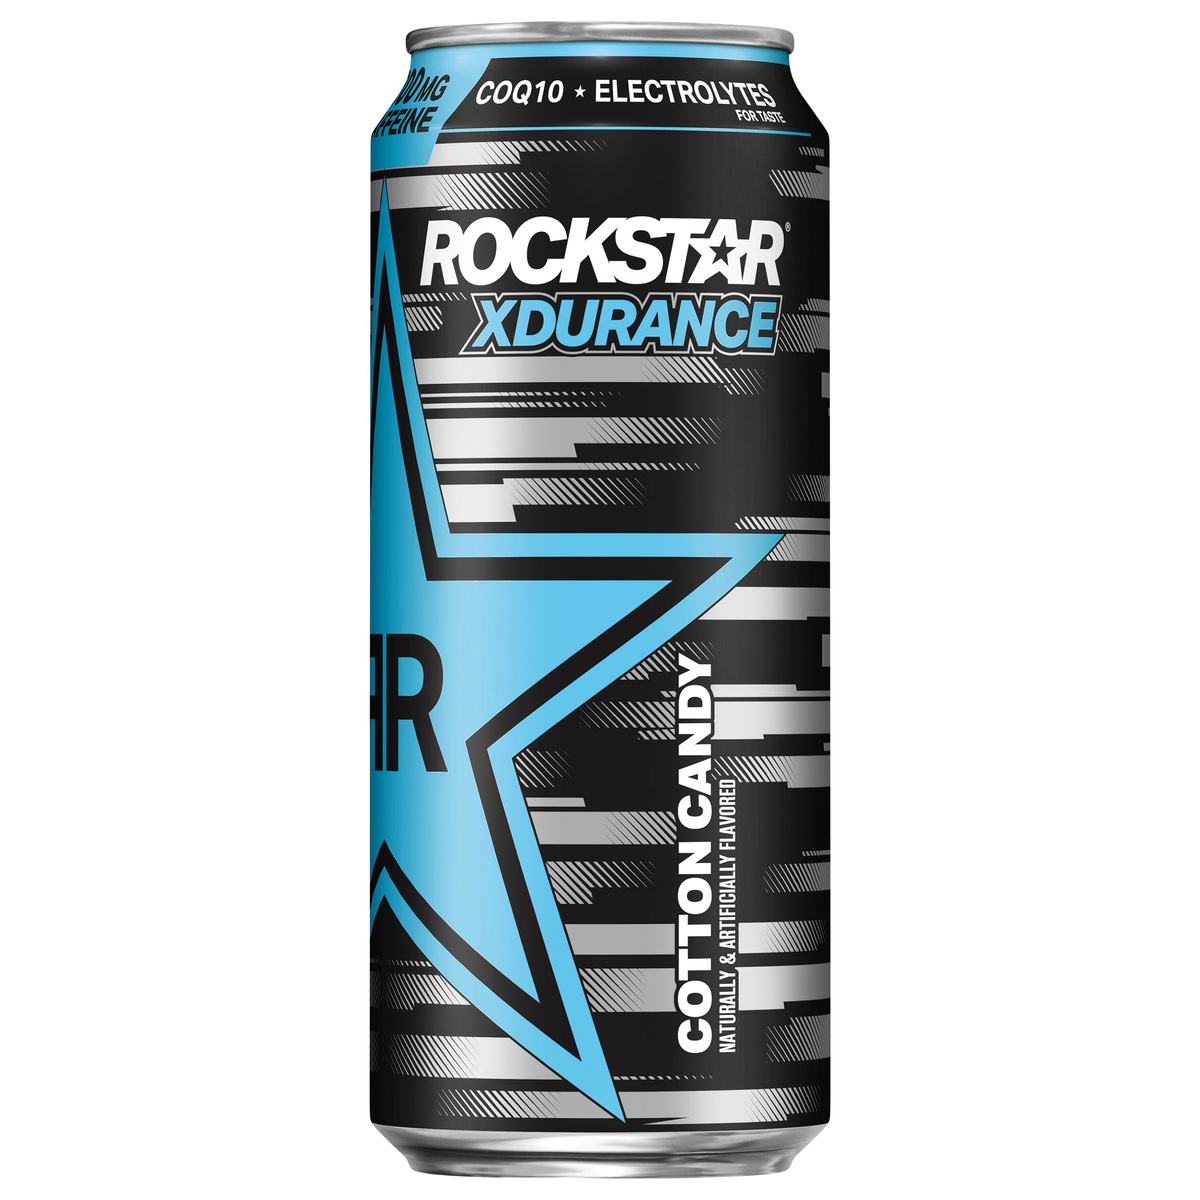 slide 1 of 1, Rockstar Xdurance Sugar Free Energy Drink Cotton Candy Naturally & Artificially Flavored 16 Fl Oz Can, 16 fl oz